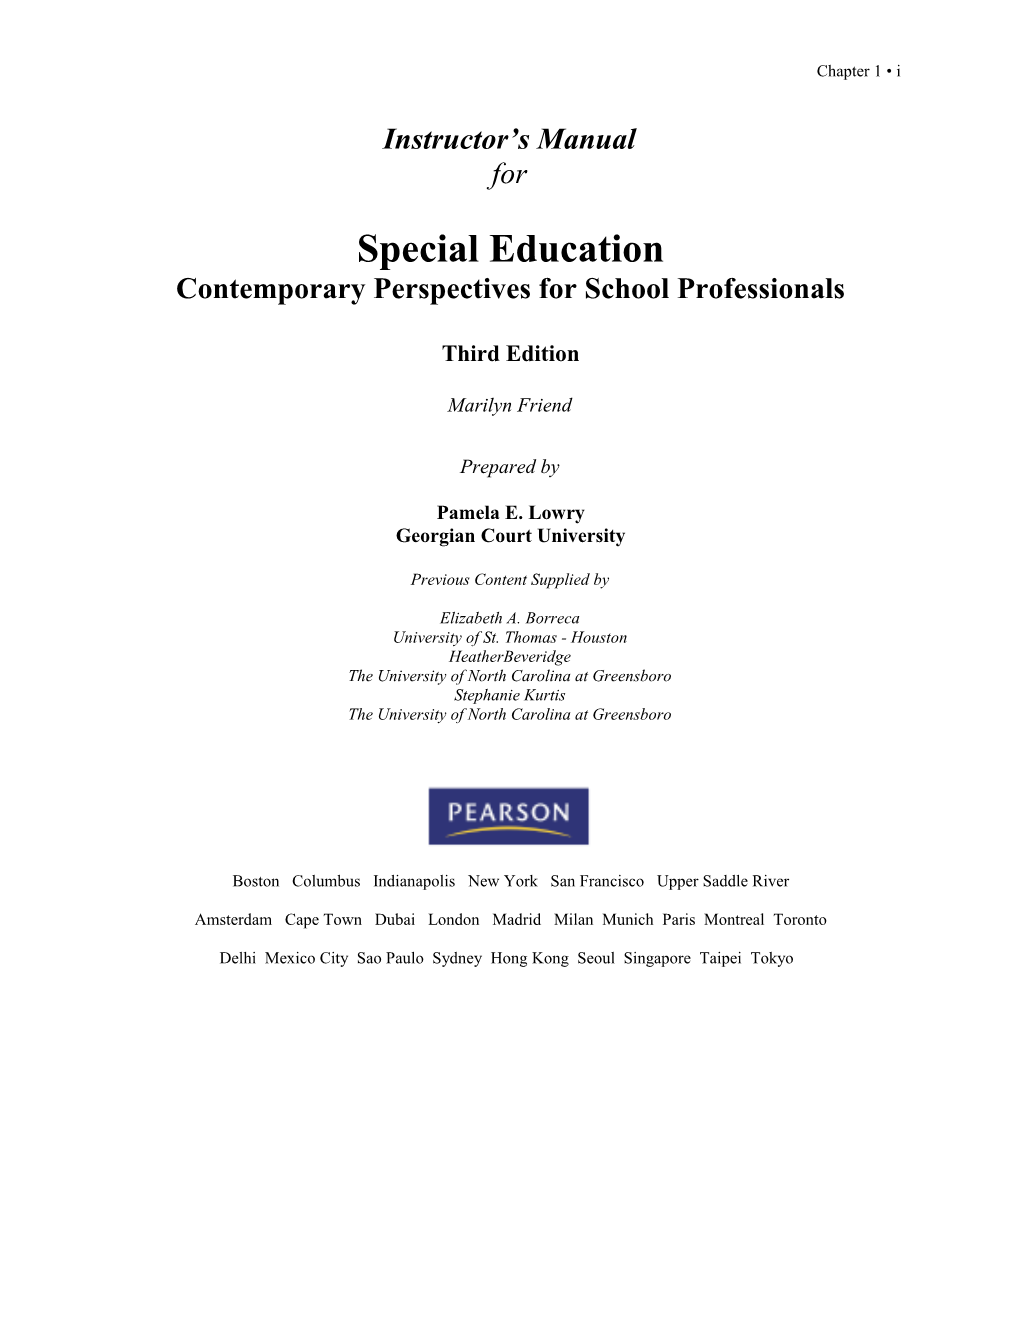 Contemporary Perspectives for School Professionals